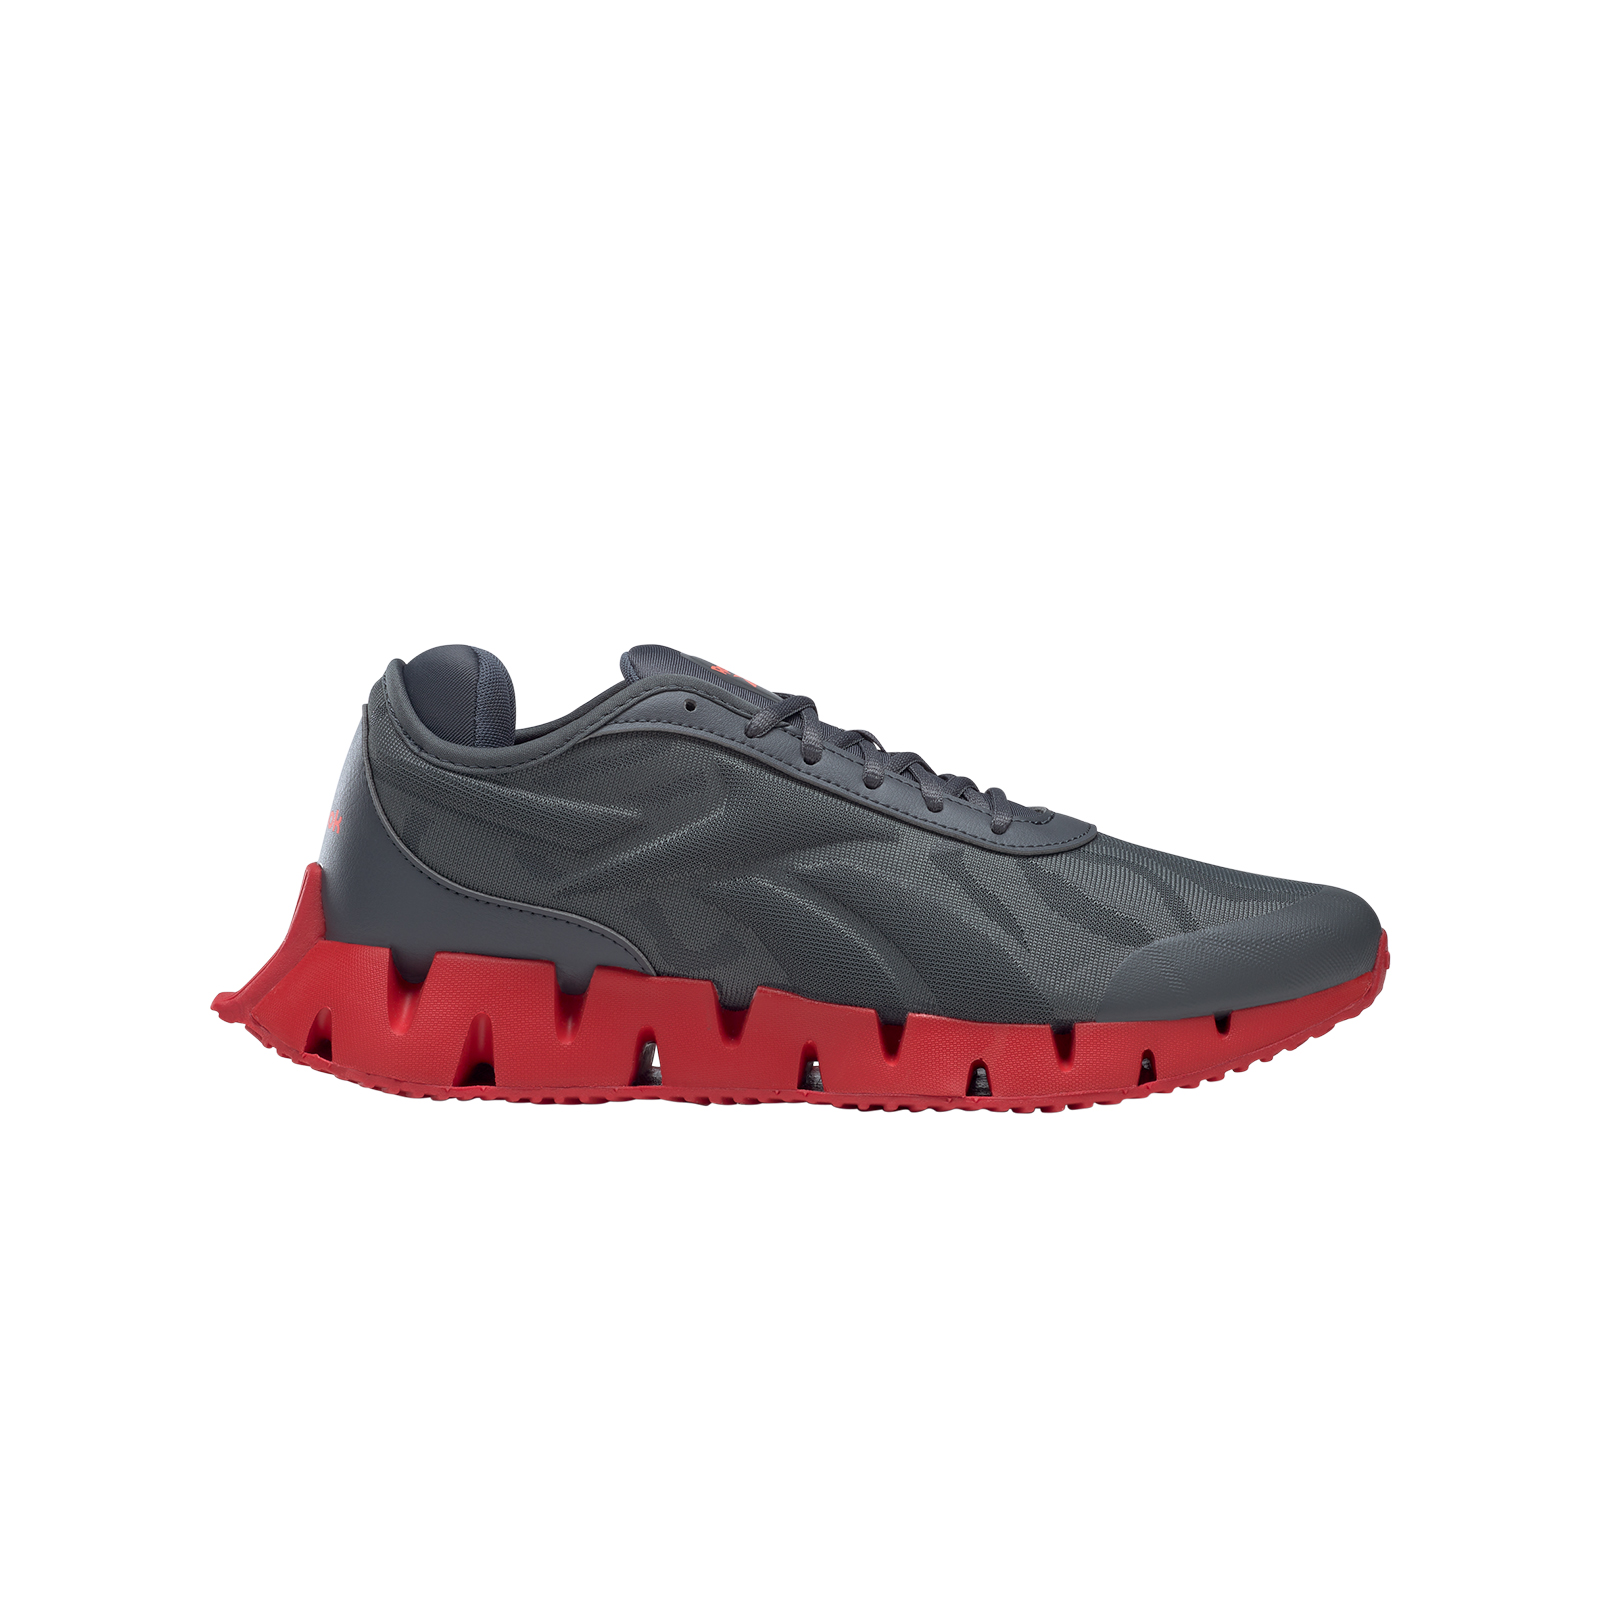 Reebok - ZIG DYNAMICA 3 - PURGRY/CLGRY3/VECRED Ανδρικά > Παπούτσια > Αθλητικά > Παπούτσι Low Cut